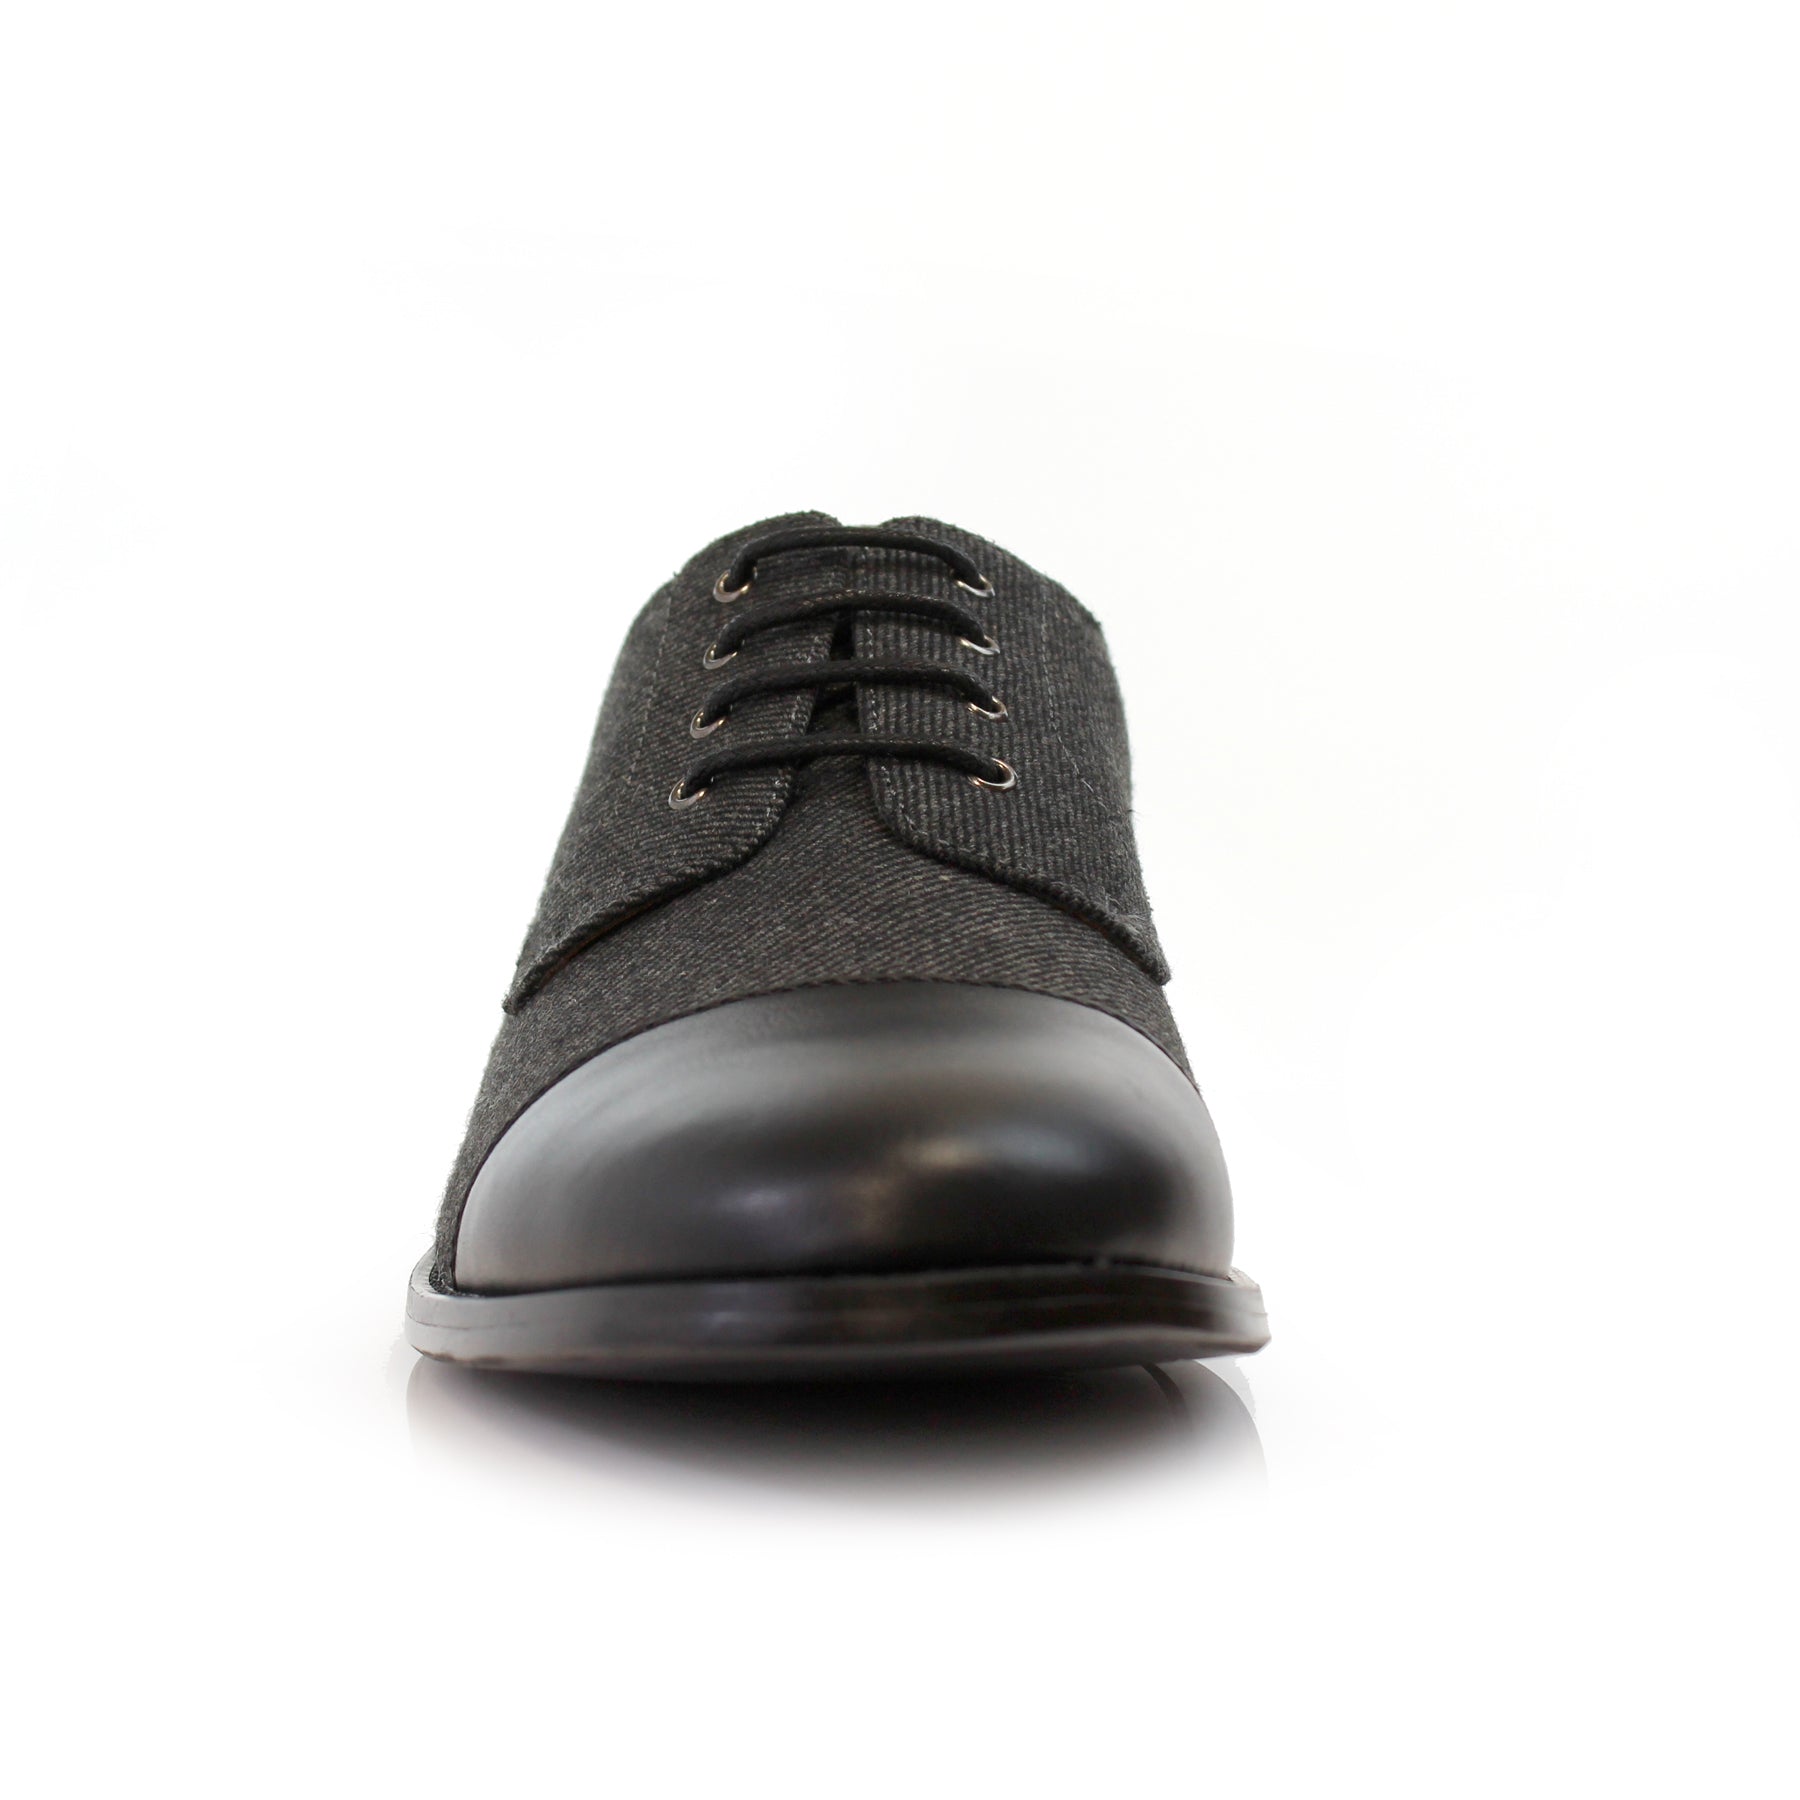 Duo-textured Woolen Derby Dress Shoes | Clifford by Polar Fox | Conal Footwear | Front Angle View